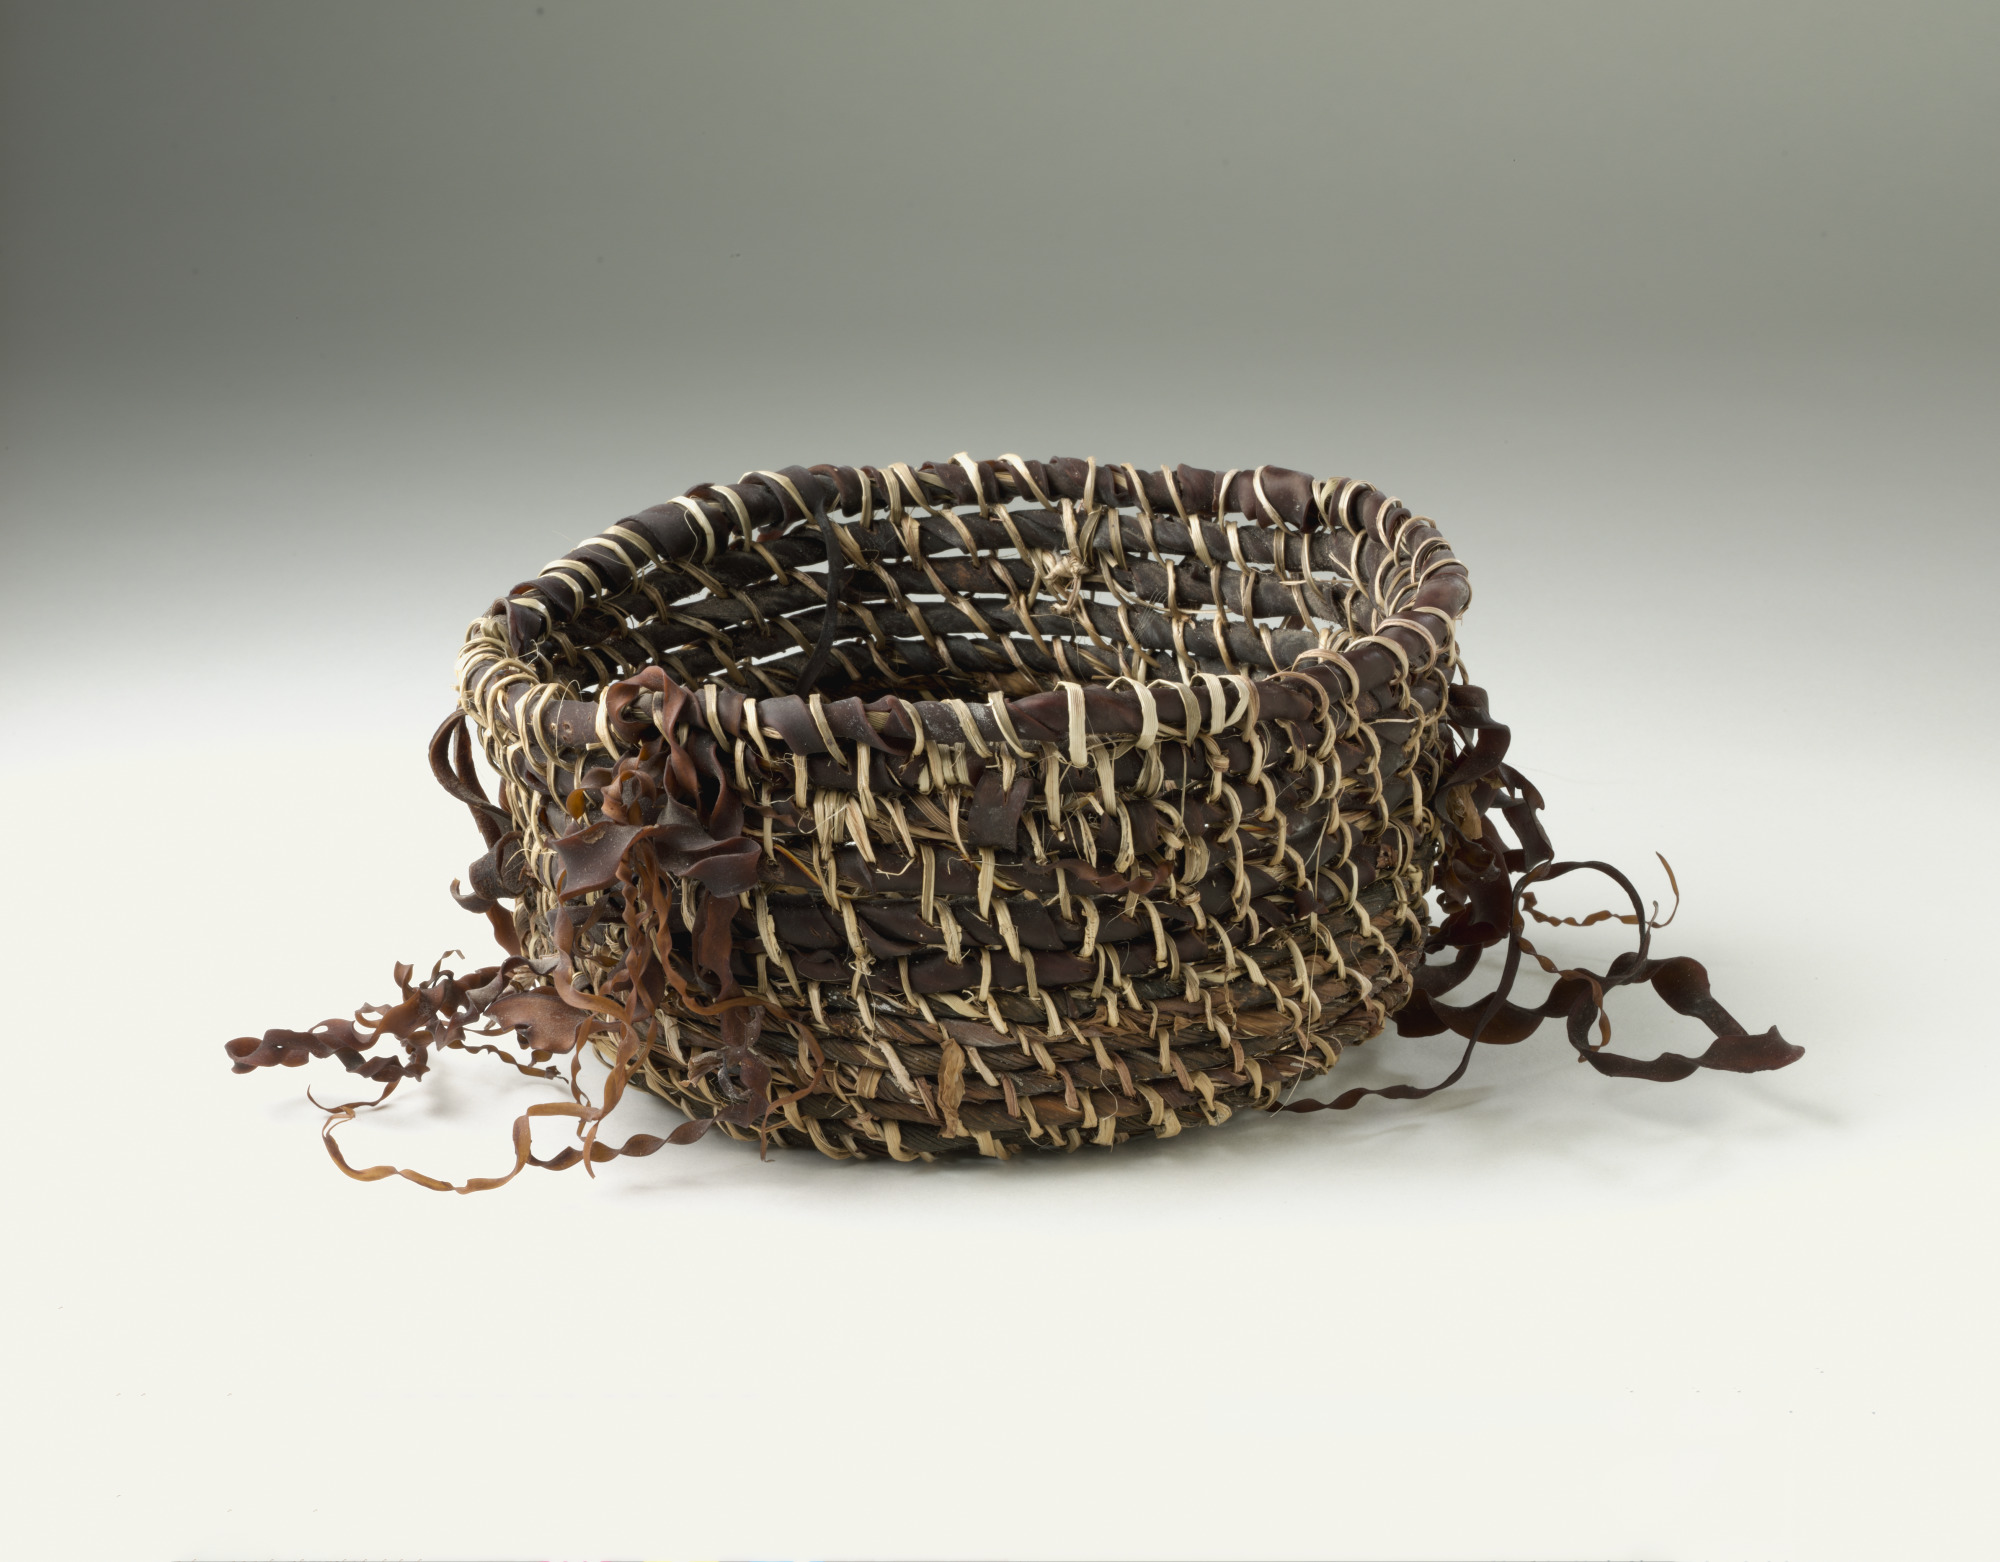 A basket woven from flax and bull kelp, made by Muriel Maynard